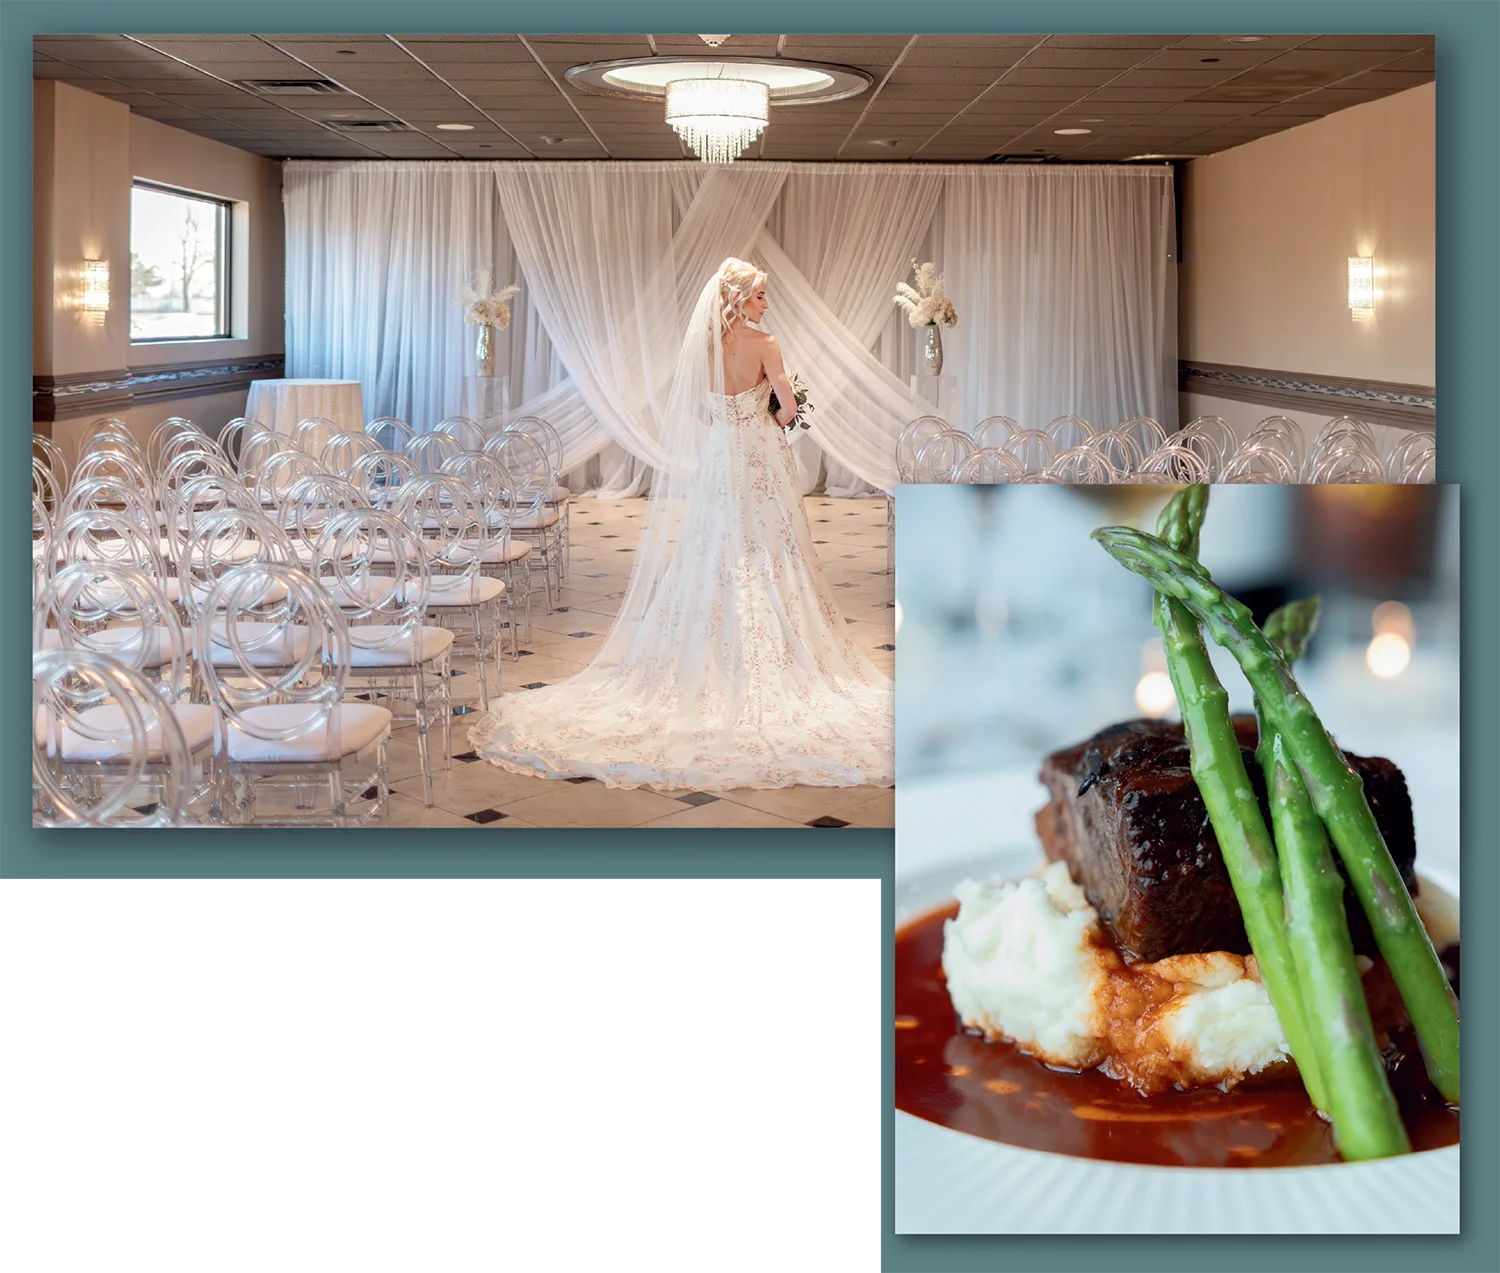 collage of photos from laurel manor showing food and bride